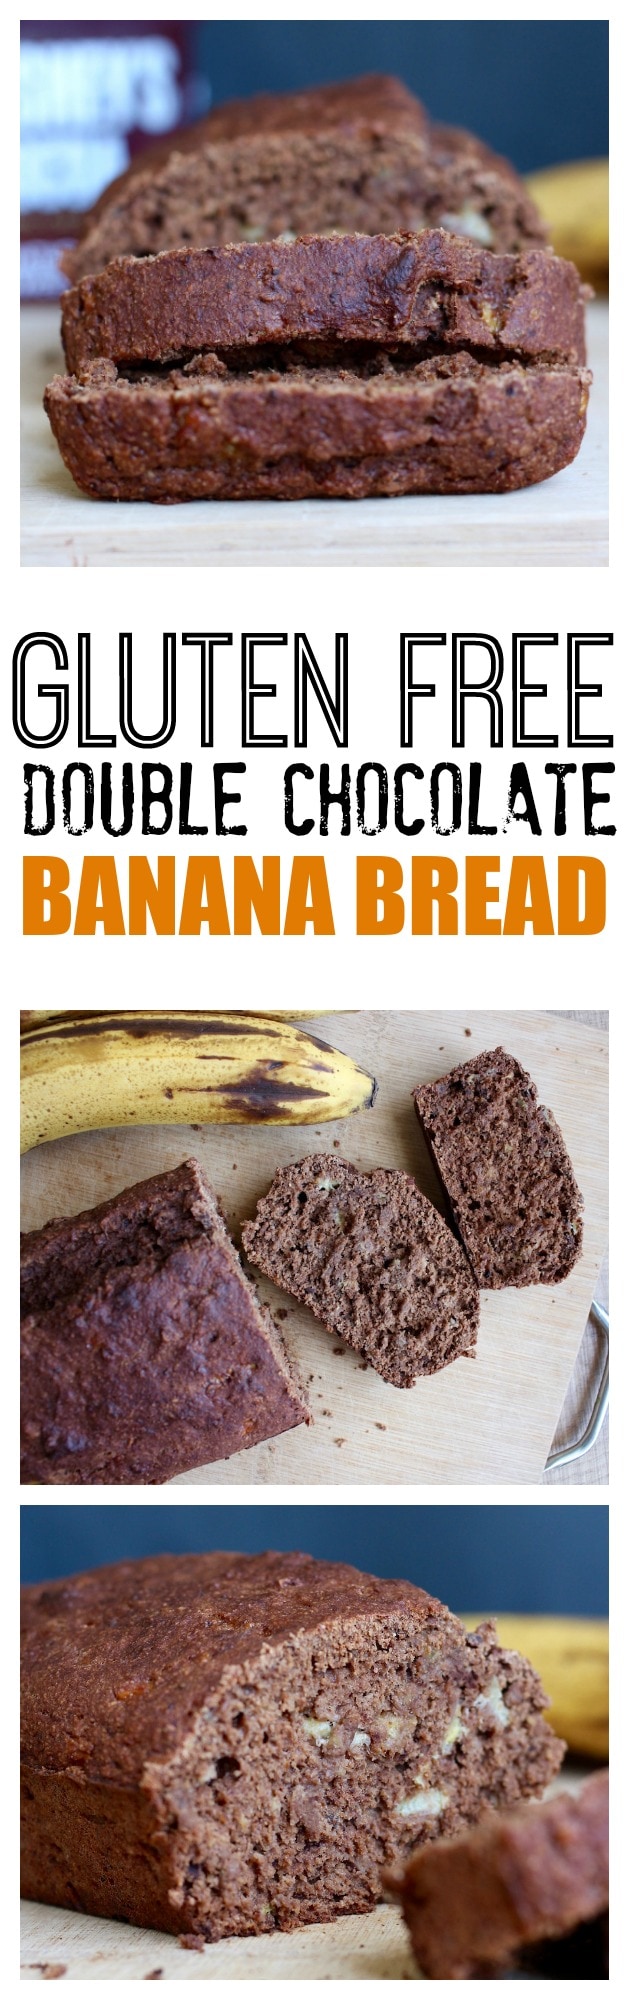 Sweetened with extra ripe bananas and speckled with chocolate chips, this Gluten Free Double Chocolate Banana Bread is perfect for a snack or quick breakfast on the go.